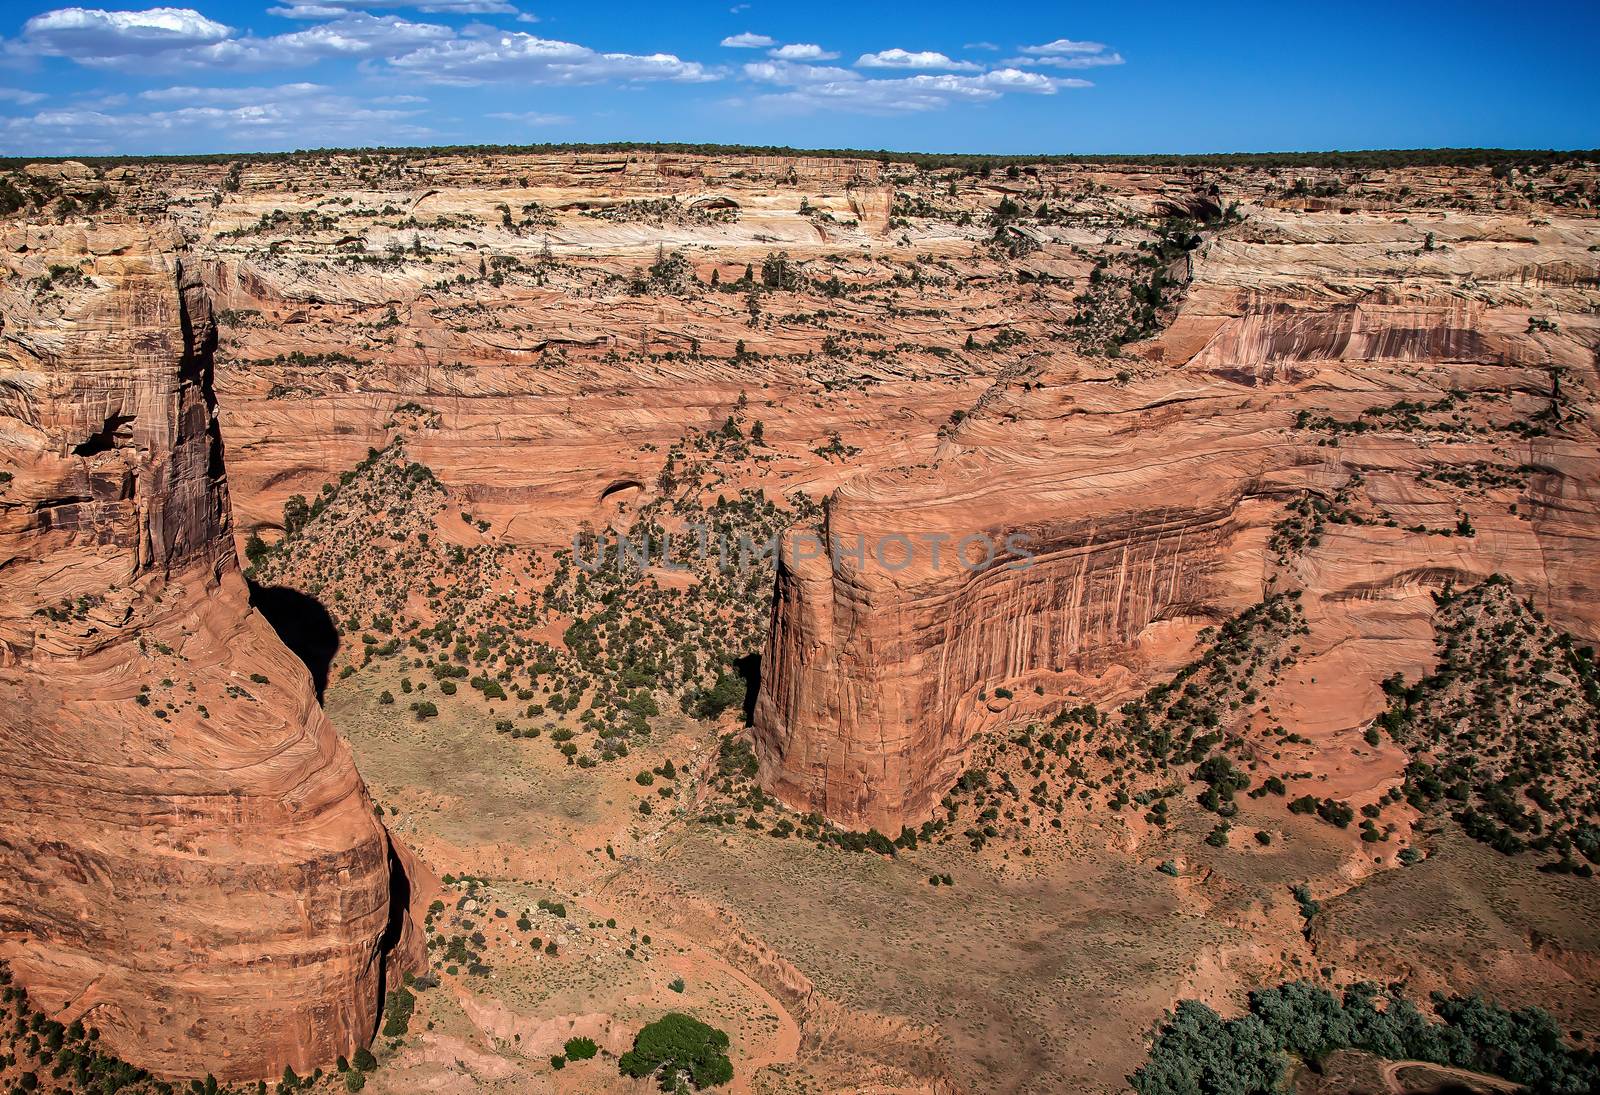 ancient native American trails and dwellings can all be found in Canyon de Chelly National Monument in Arizona.